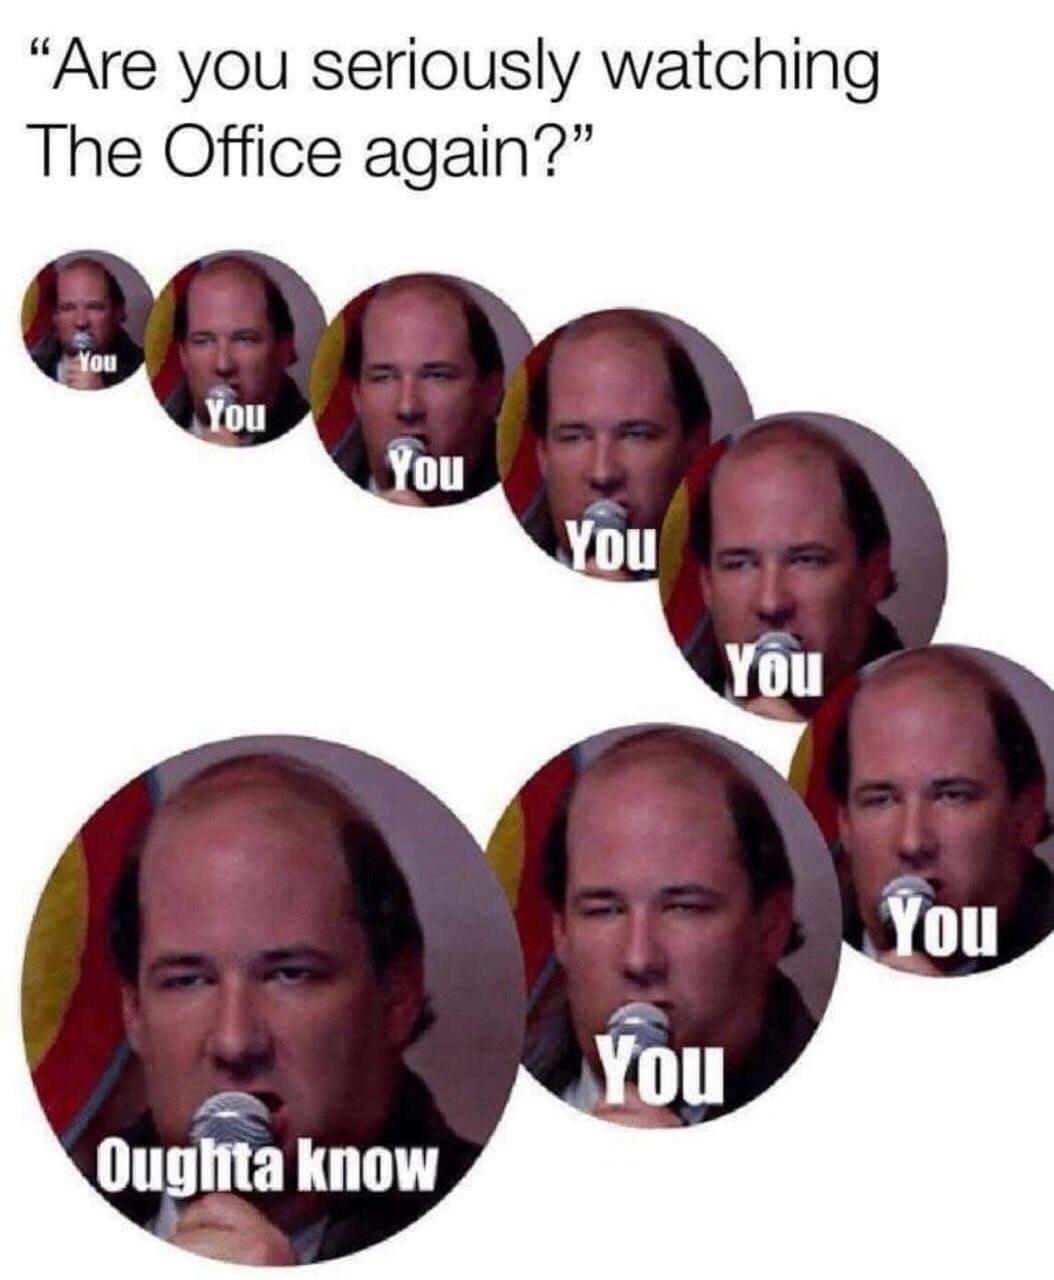 funny memes - dank memes - kevin memes the office - "Are you seriously watching The Office again?" cepe You You You Oughta know You You You You